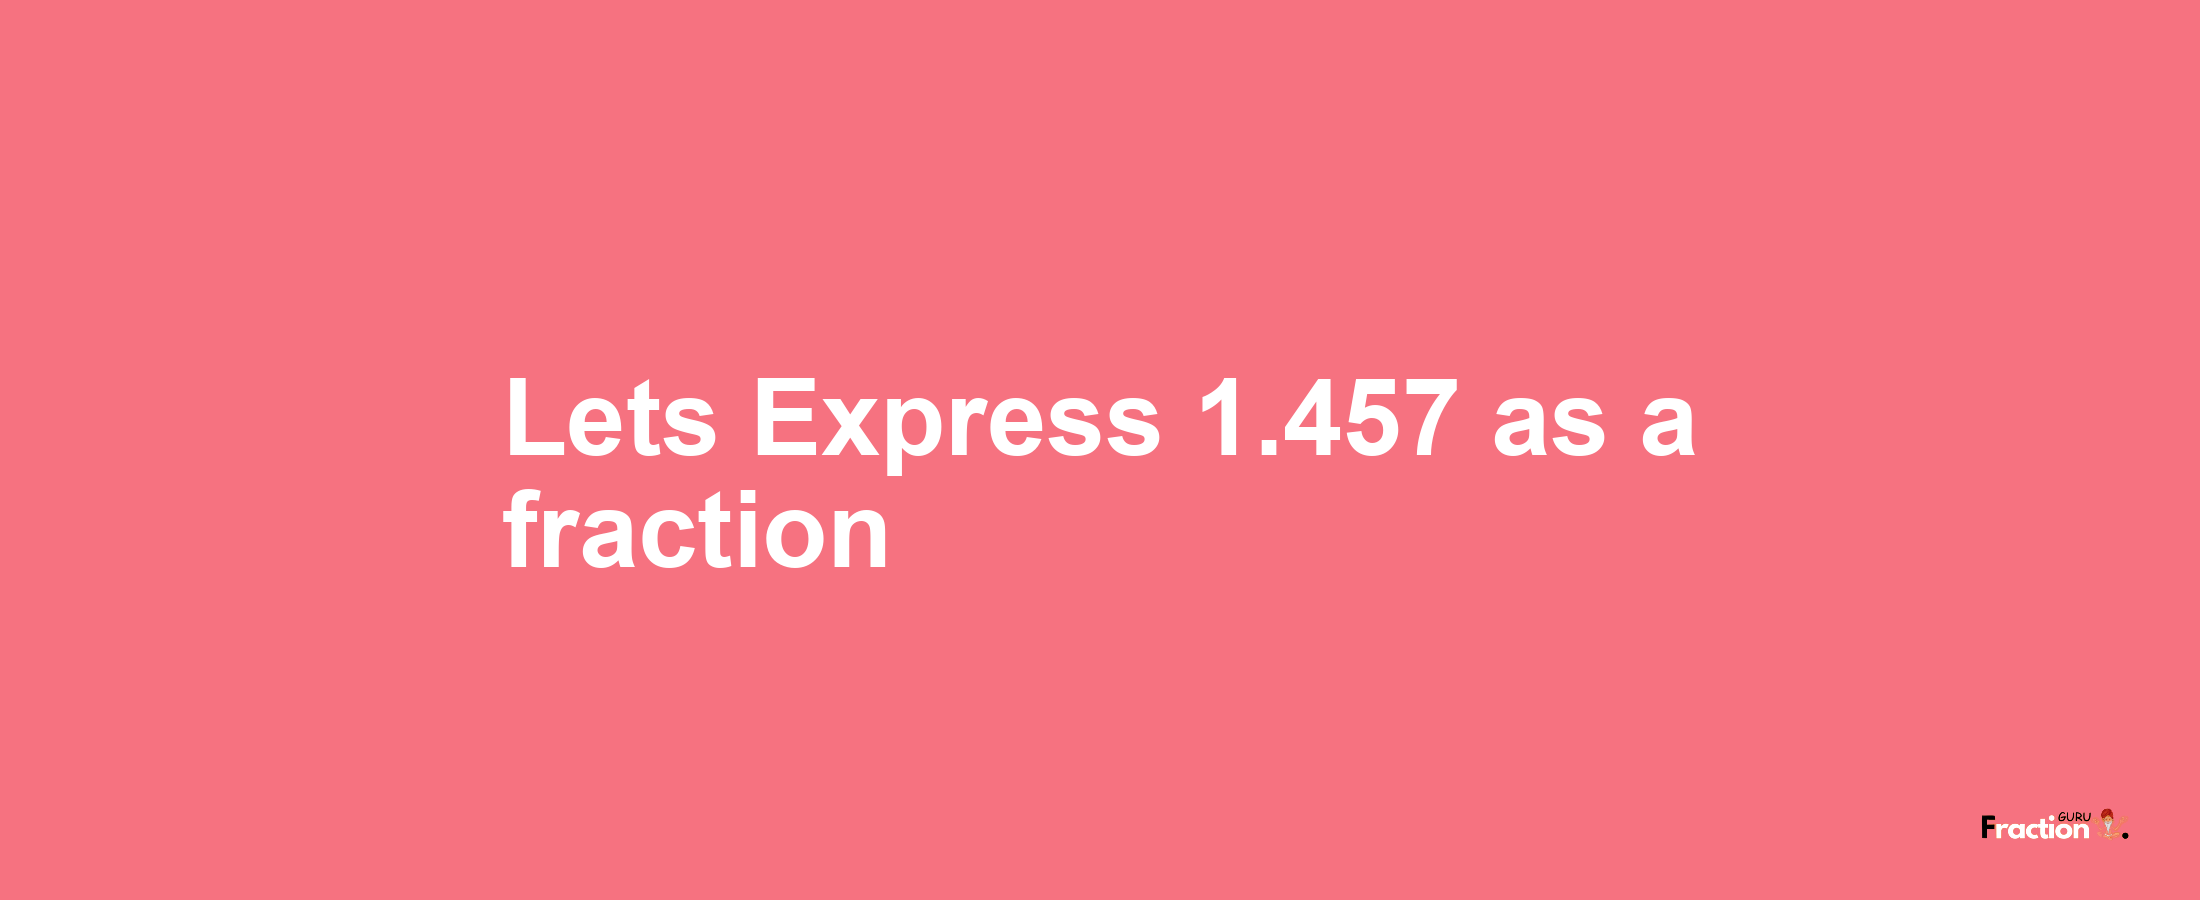 Lets Express 1.457 as afraction